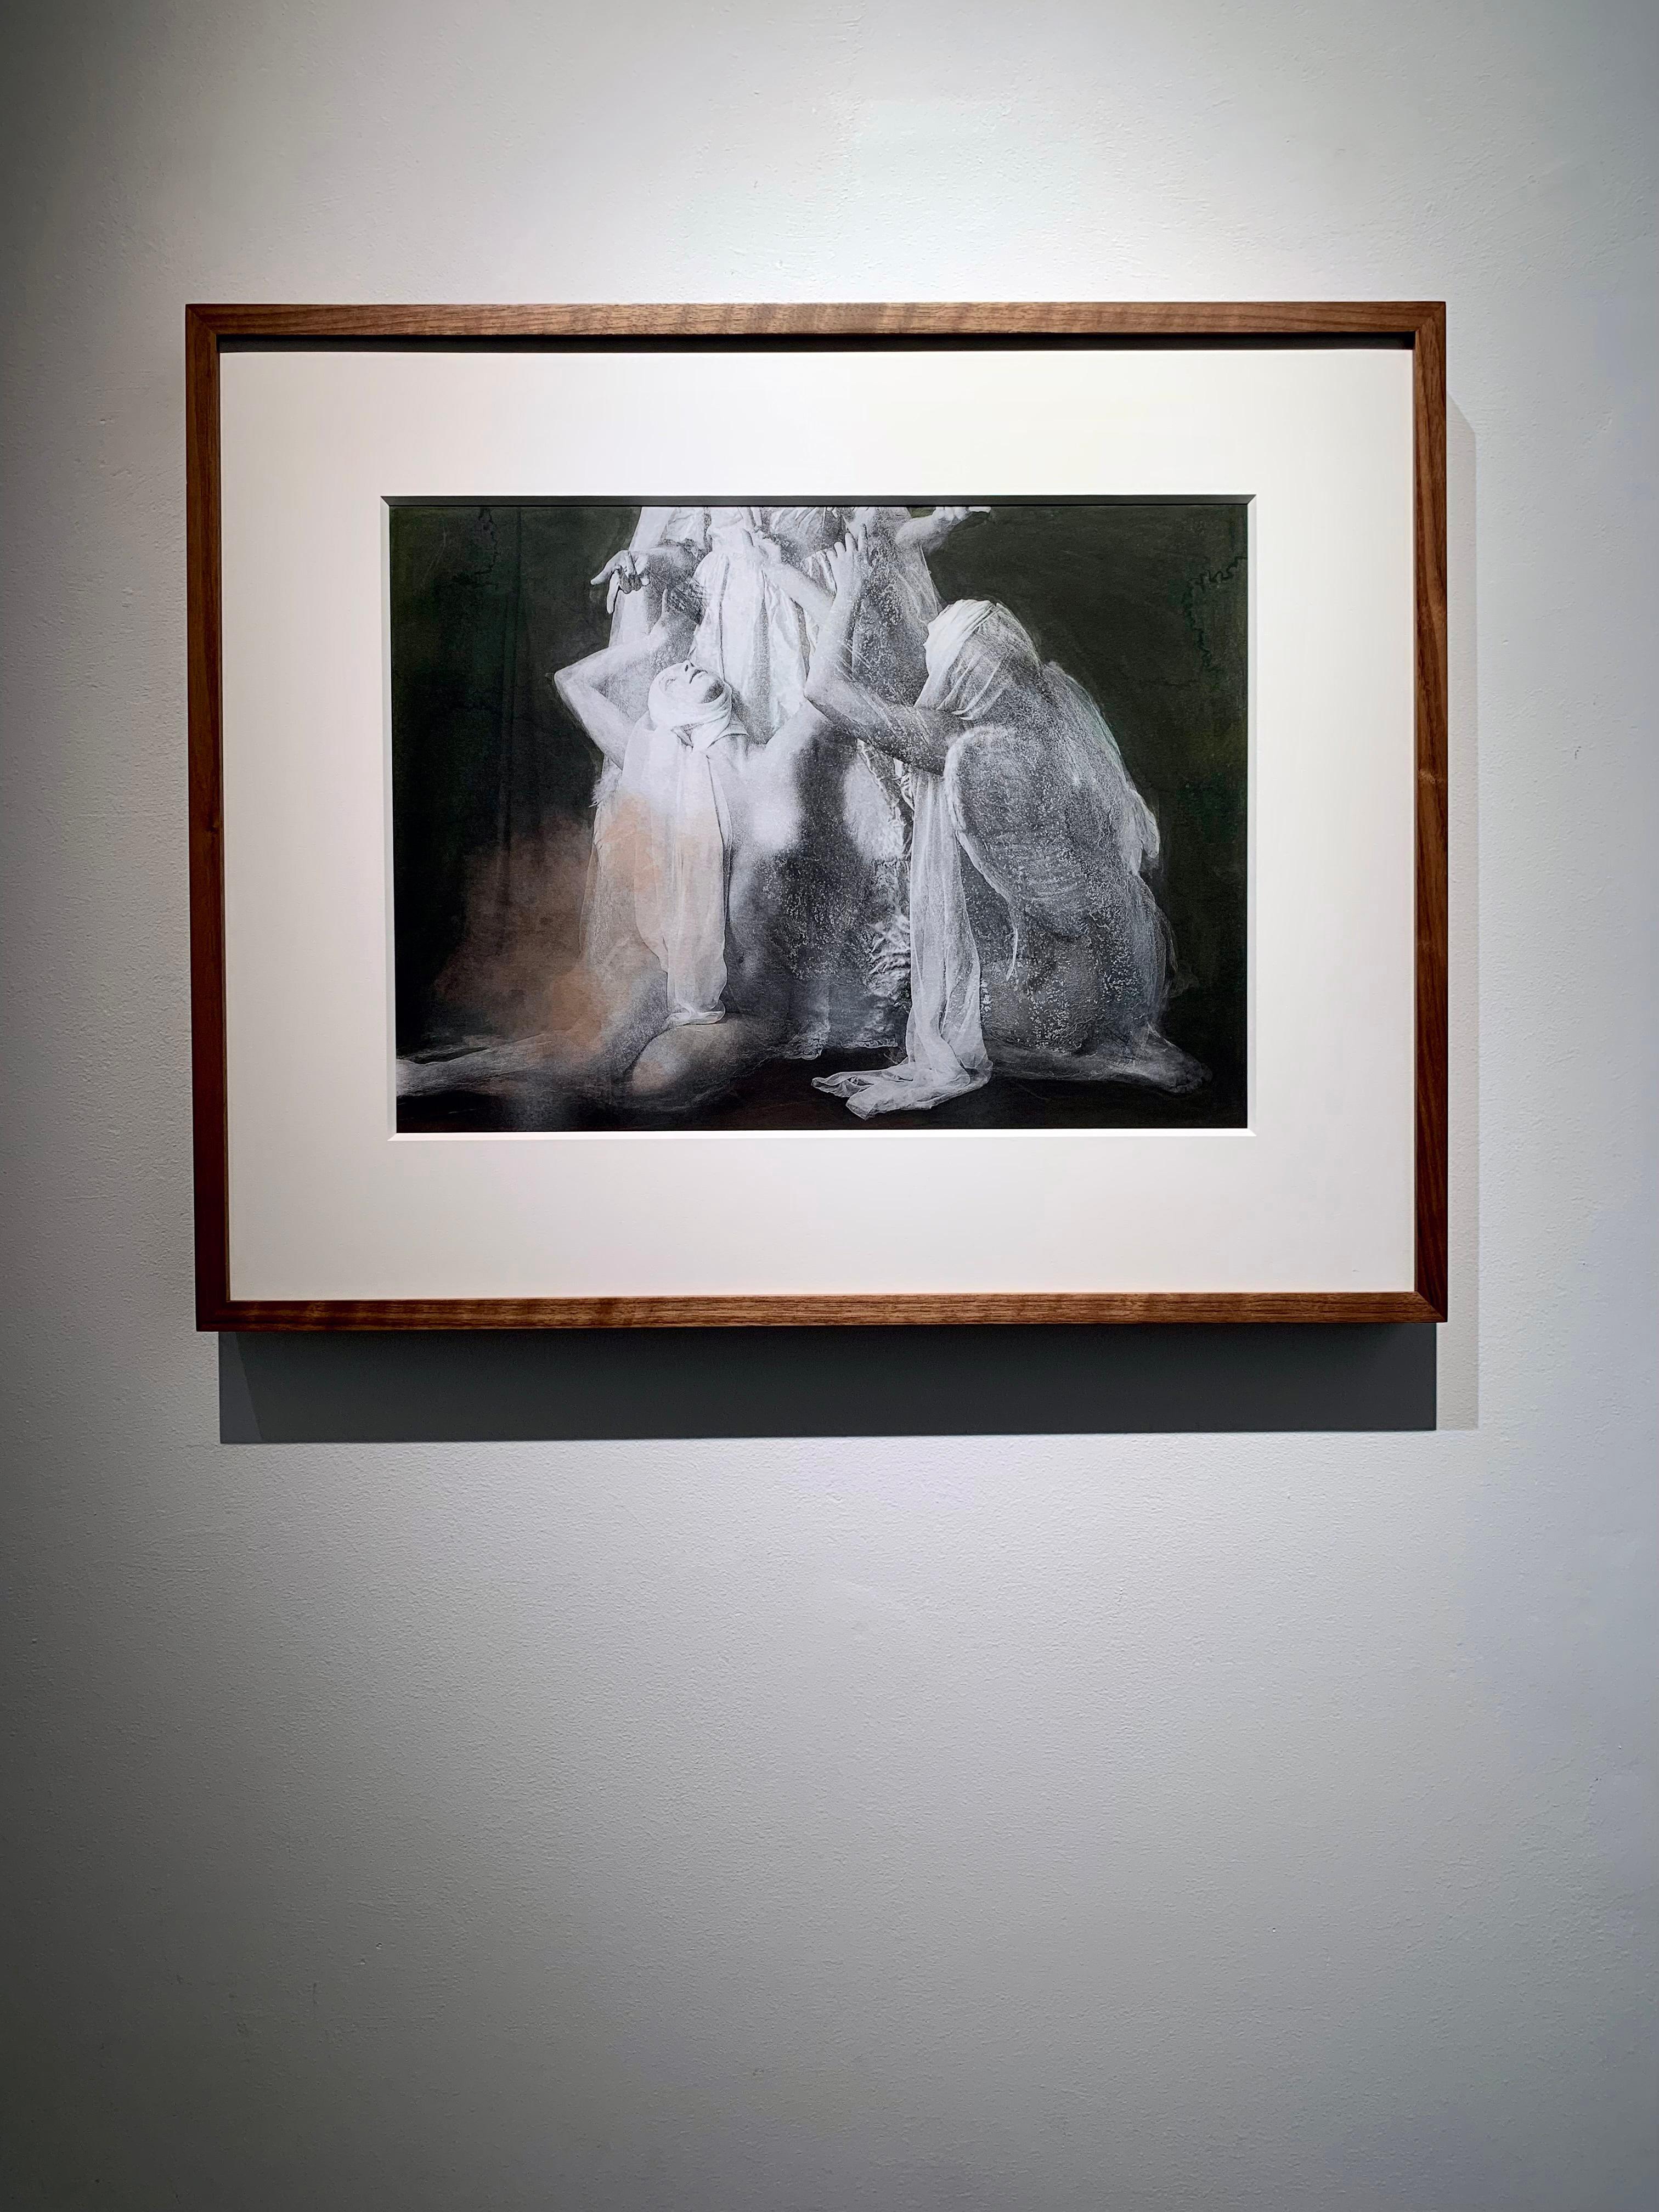 Hand-coloured Print of weeping mythical sculpture angels in Walnut Frame  - Brown Portrait Print by Katie Eleanor